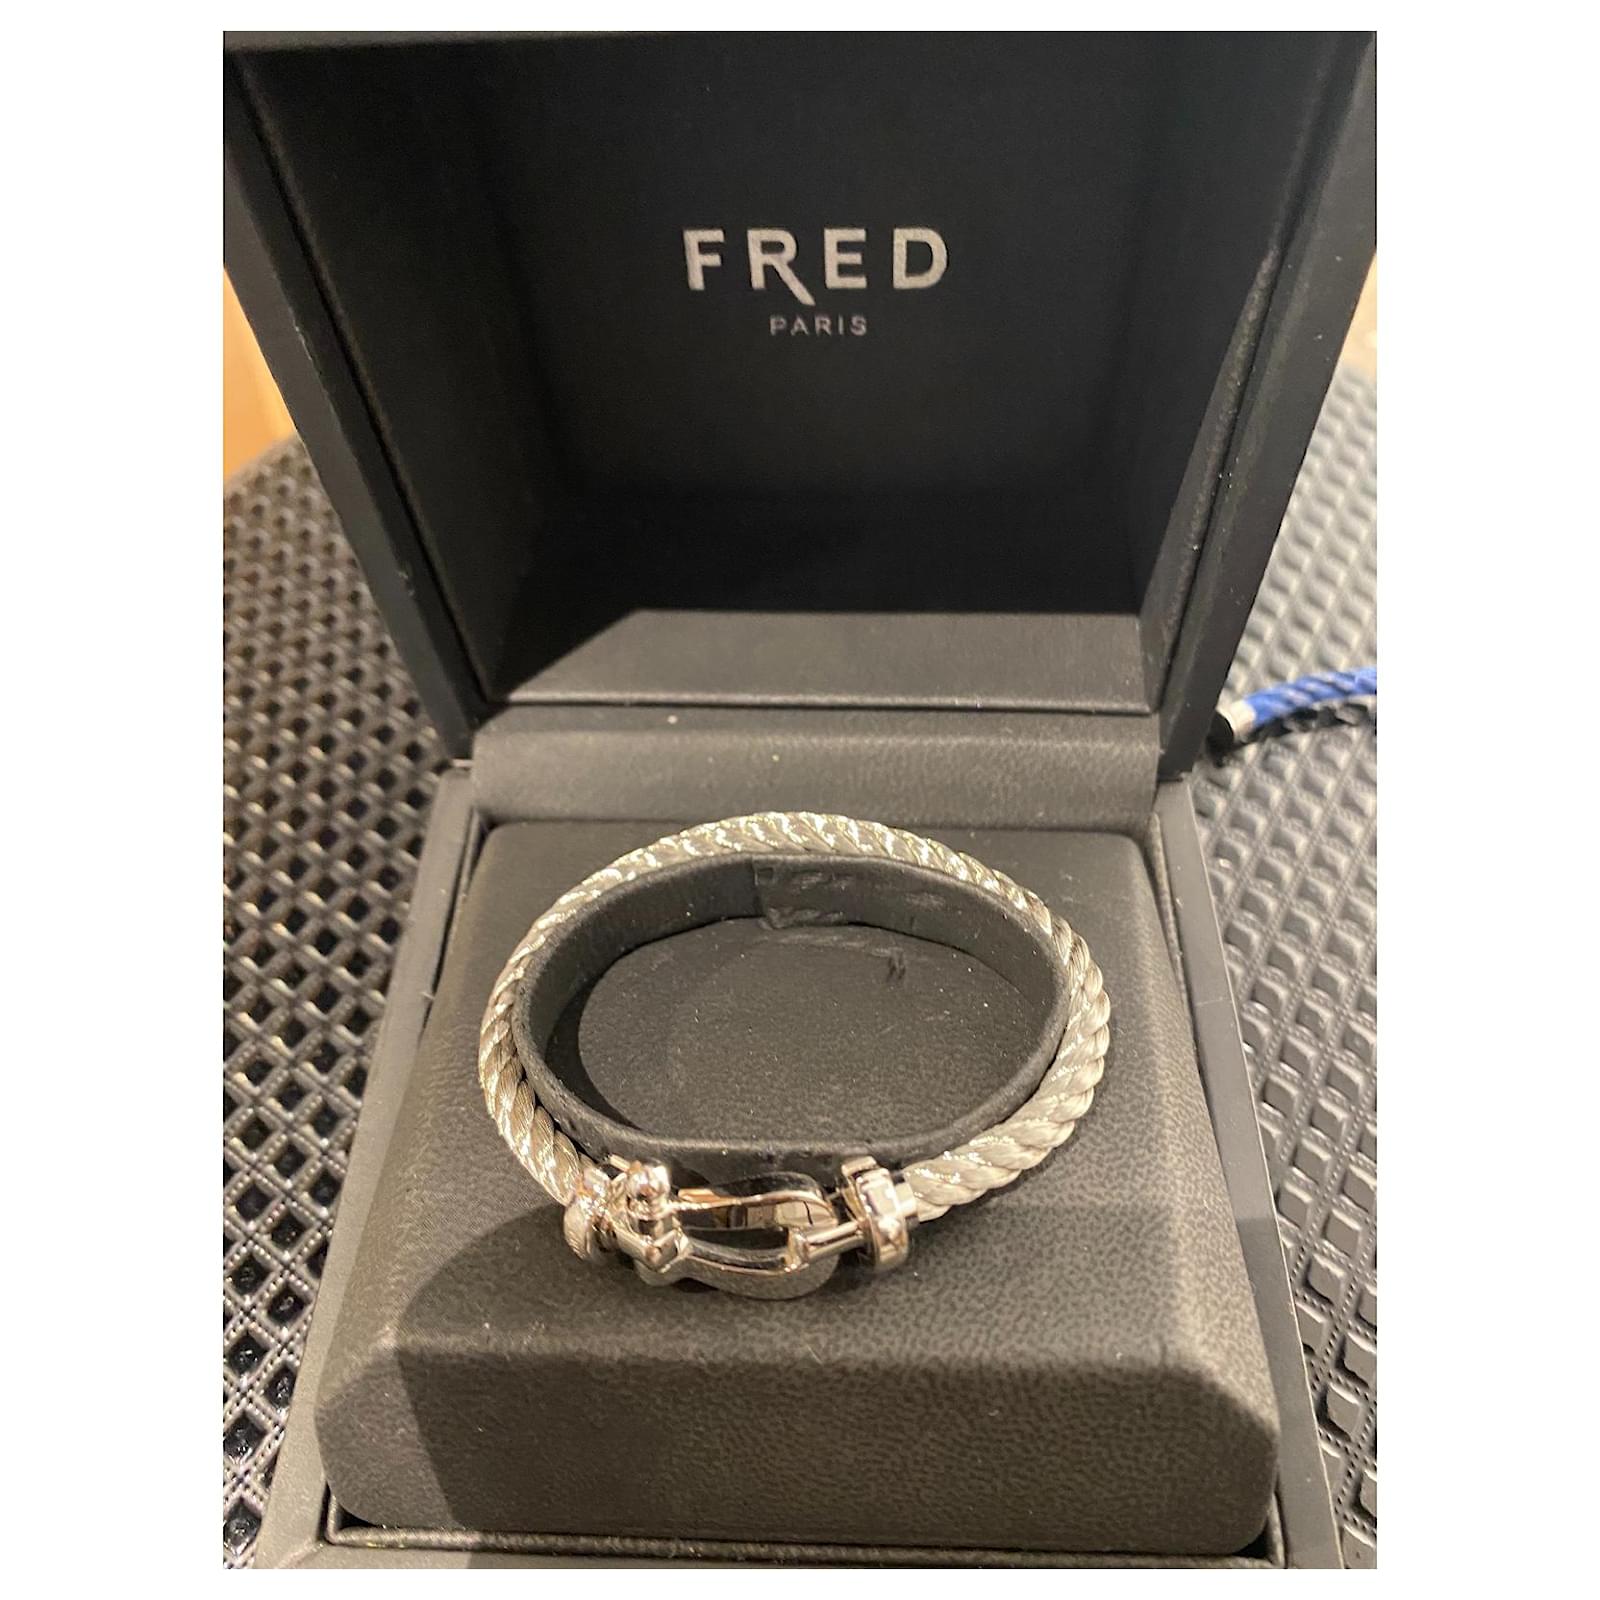 Fred force bracelet 10 GM SHACKLE IN WHITE GOLD 18K CABLE BLUE